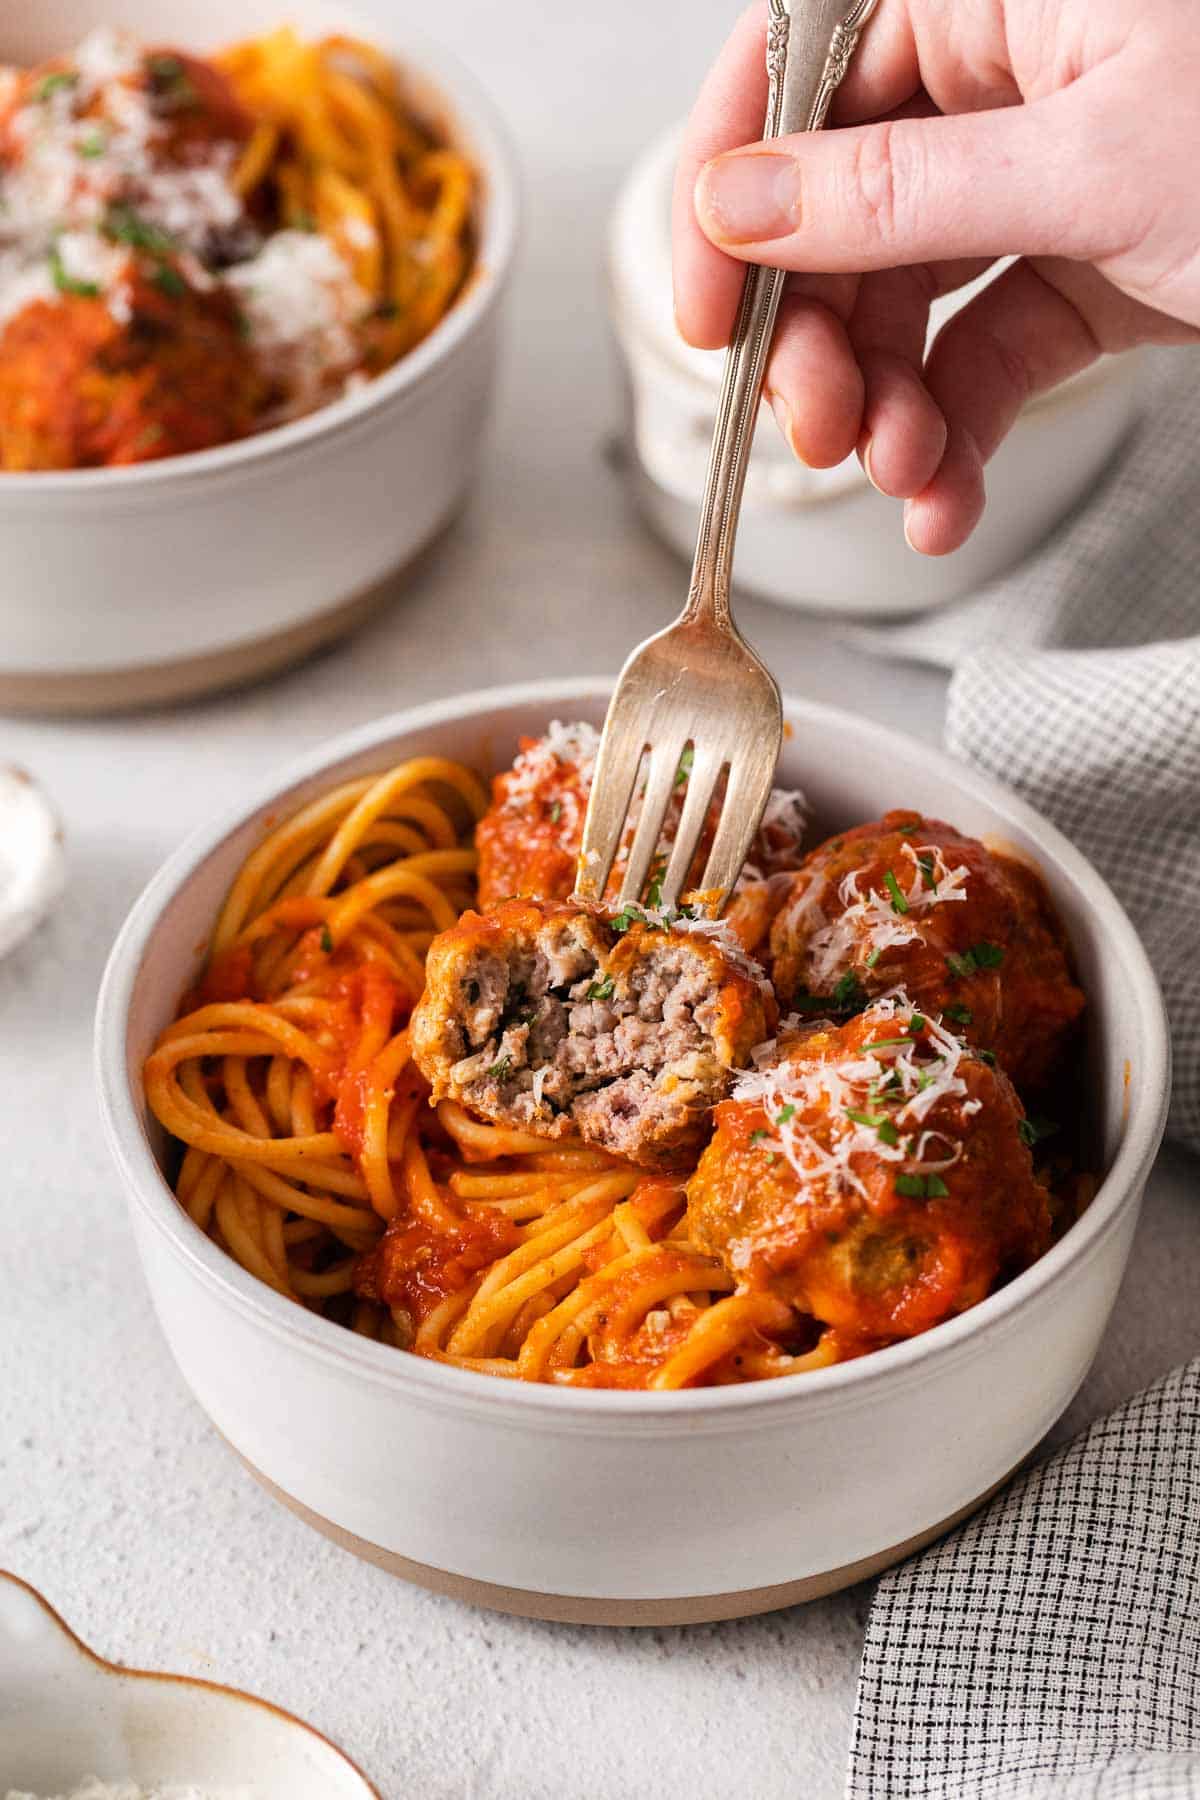 A hand using a fork to pick up a meatball and spaghetti